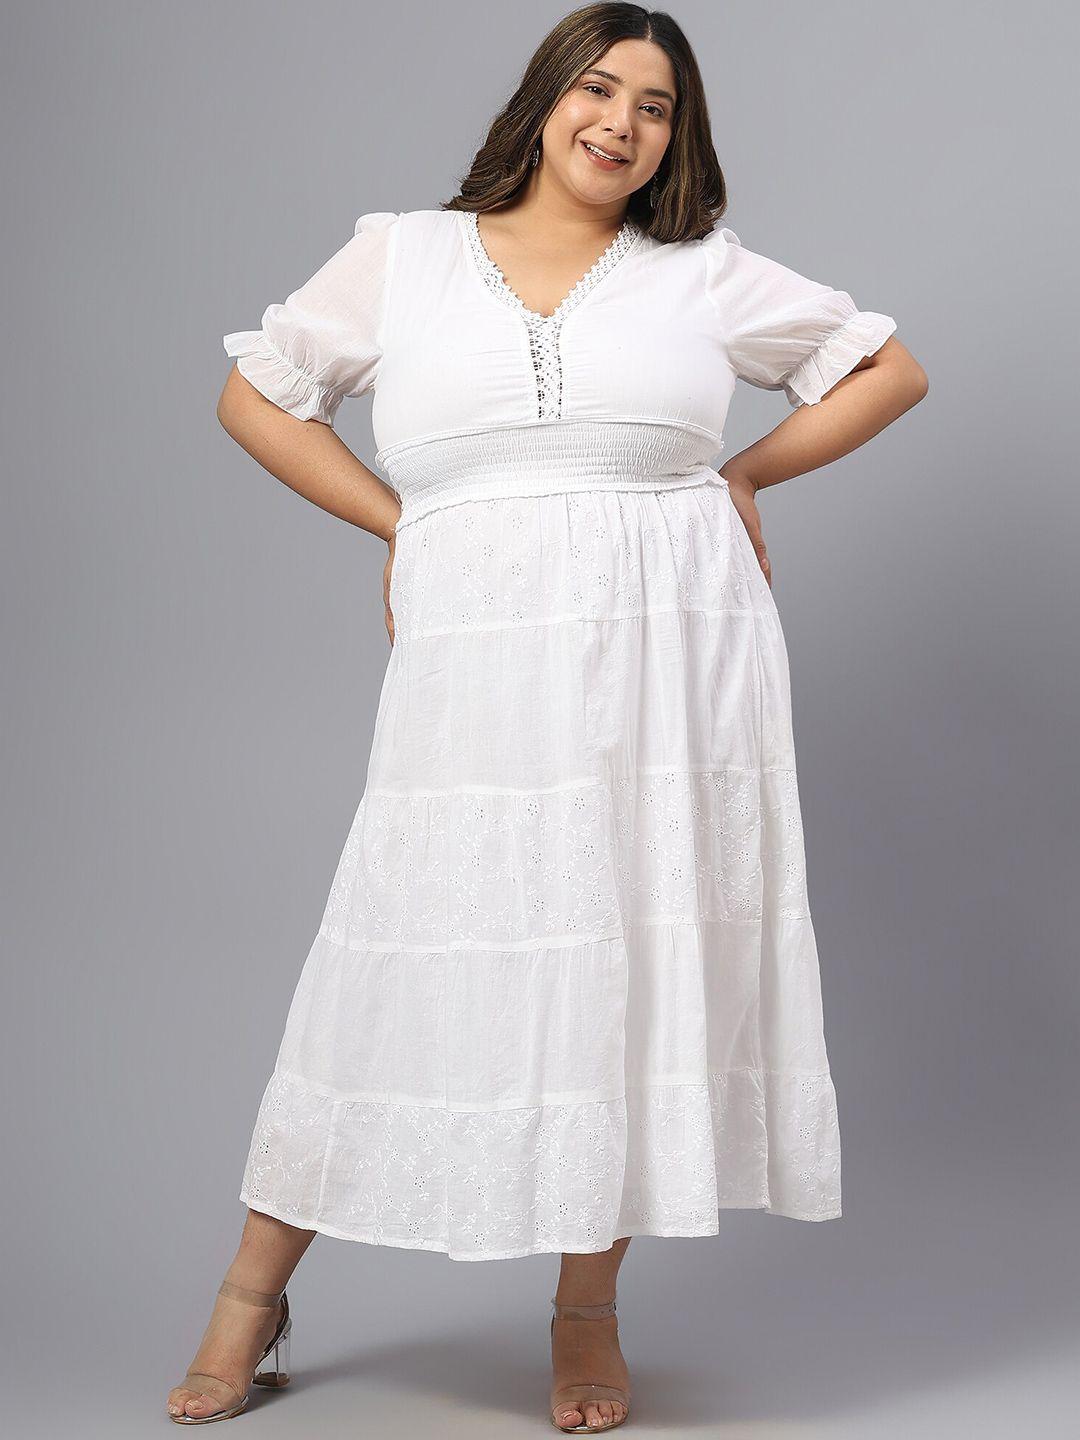 saakaa-plus-size-floral-embroidered-v-neck-bell-sleeves-schiffli-pure-cotton-midi-dress